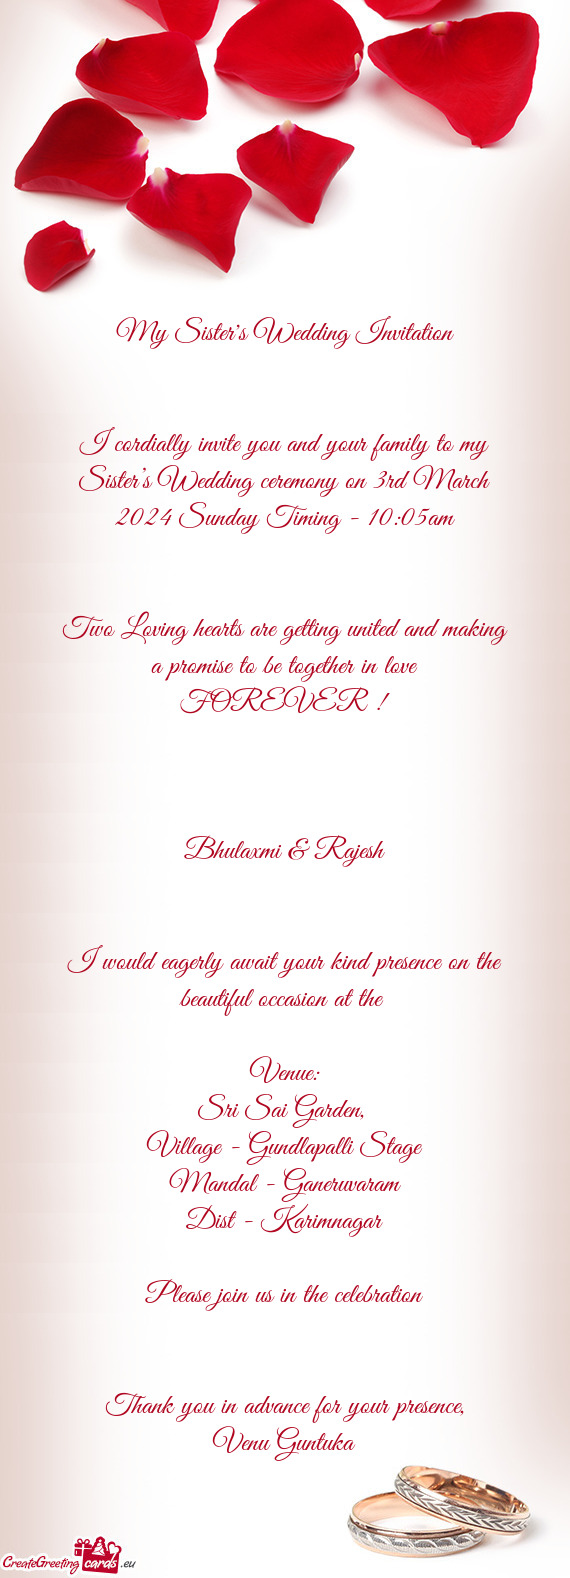 I cordially invite you and your family to my Sister’s Wedding ceremony on 3rd March 2024 Sunday Ti